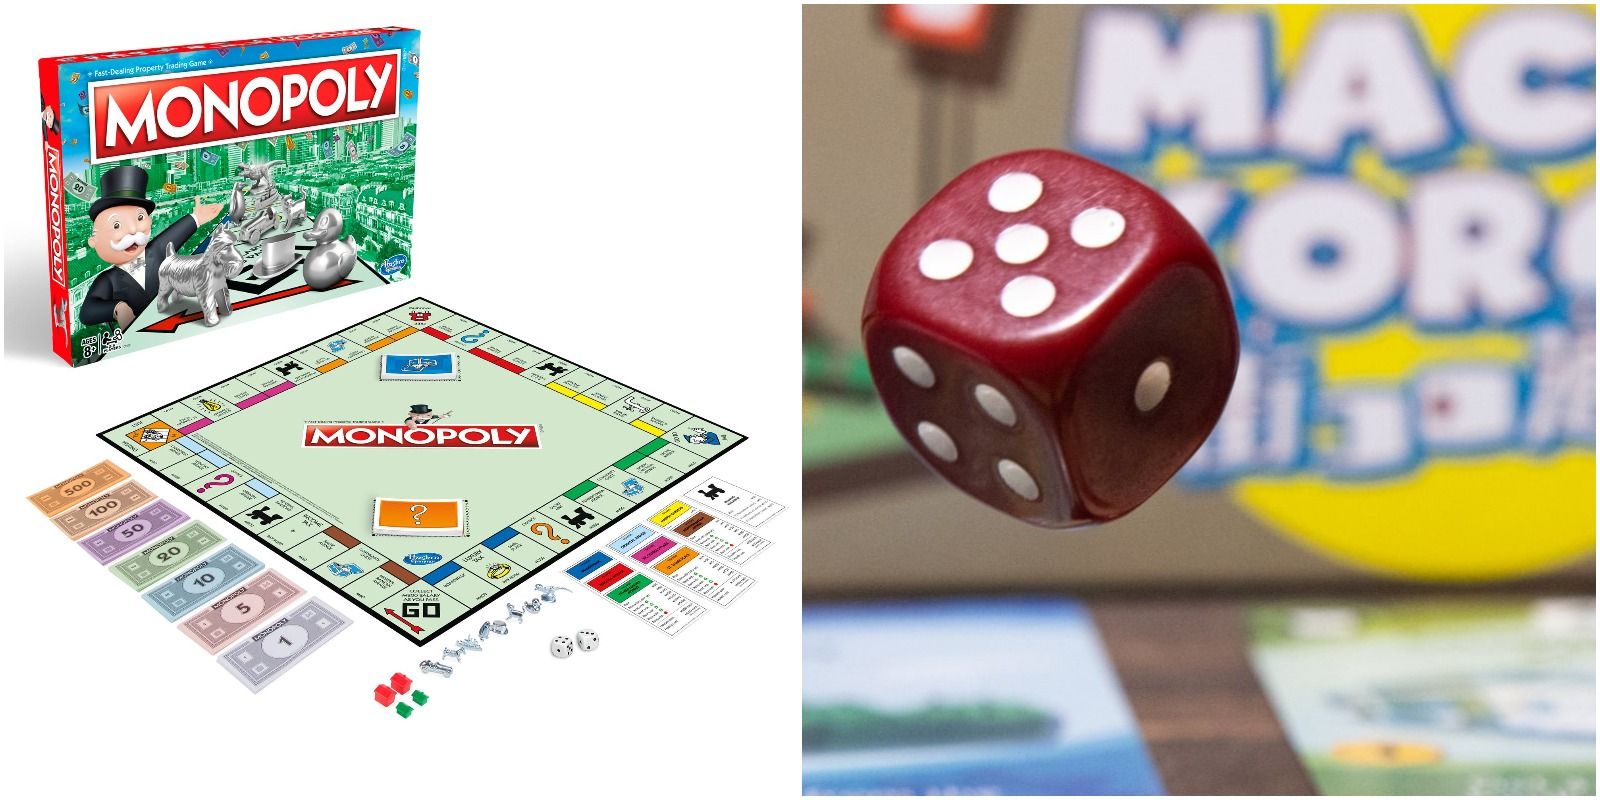 Monopoly And Machi Koro 2 Being Played Components In Box On Table Board Game